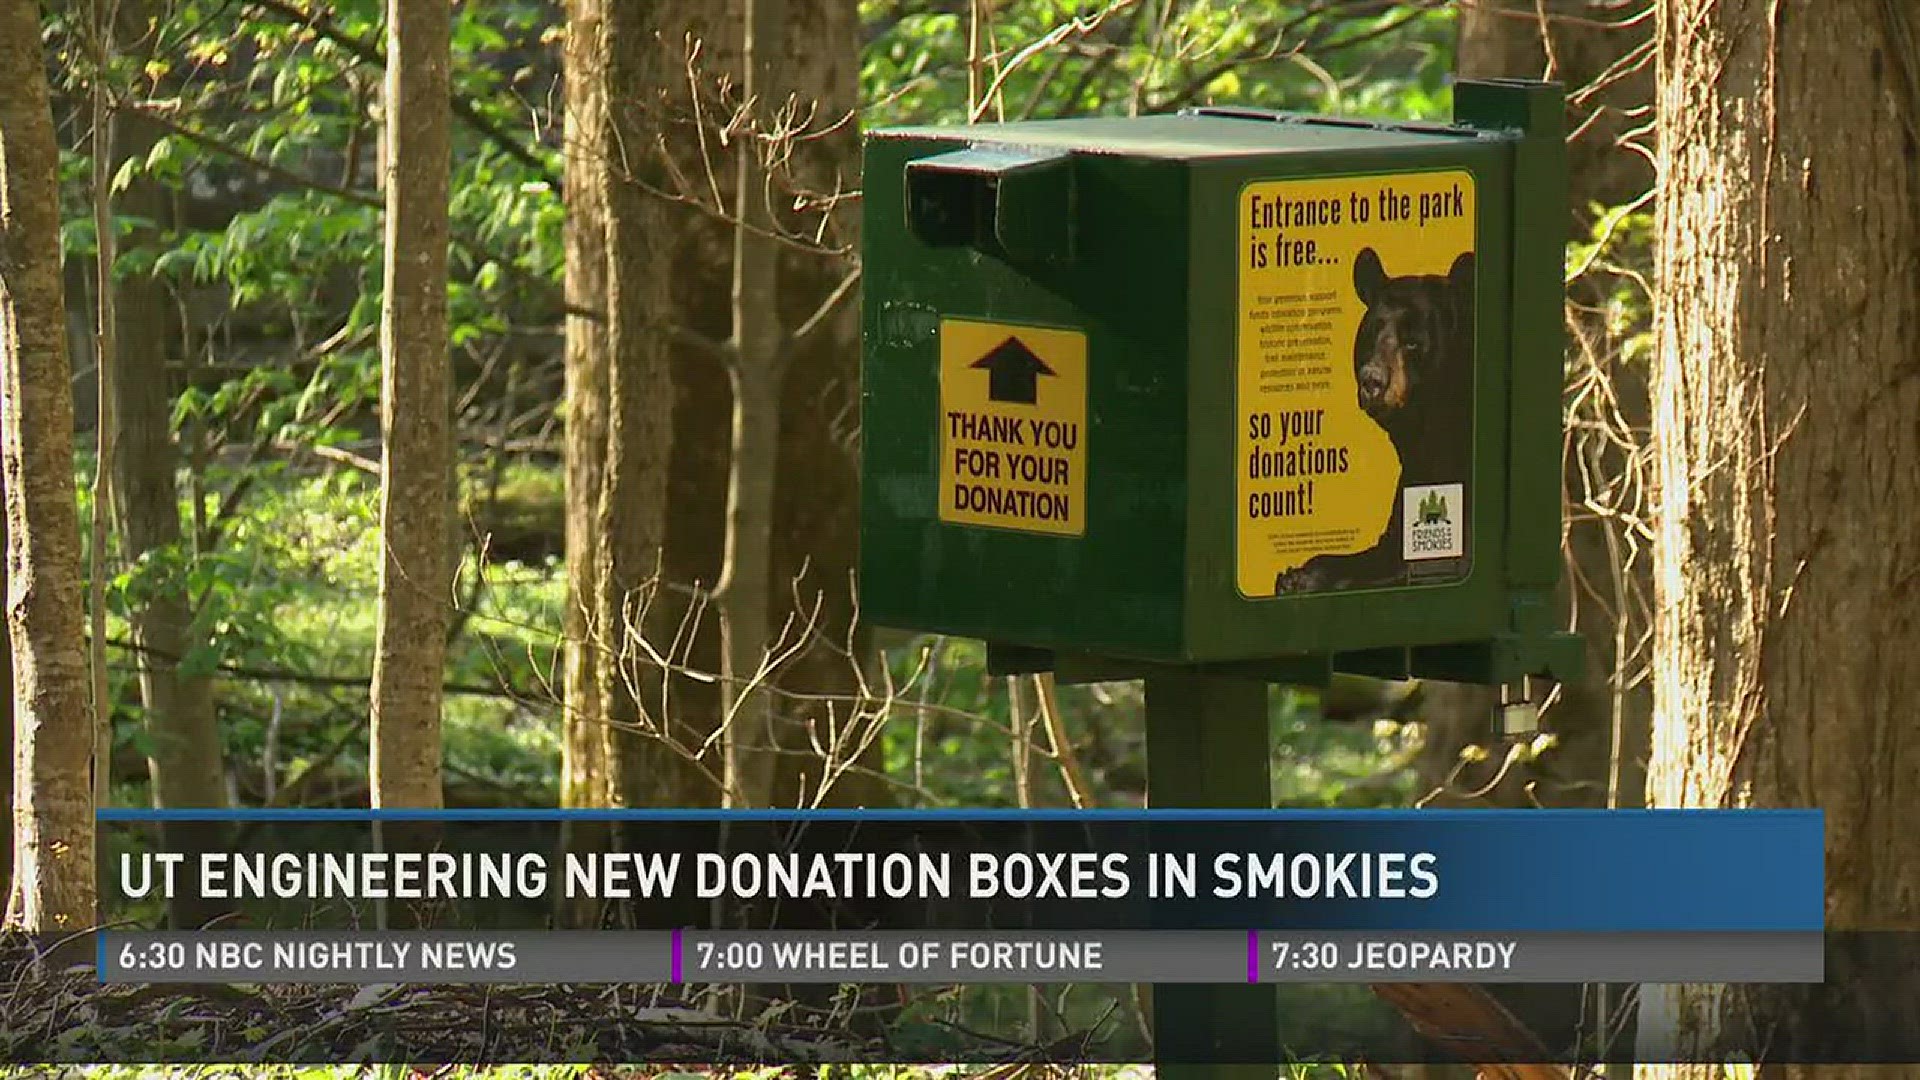 April 18, 2017: Engineering students at the University of Tennessee are building new donation boxes to keep donations in the Great Smoky Mountains National Park safe from vandalism and theft.